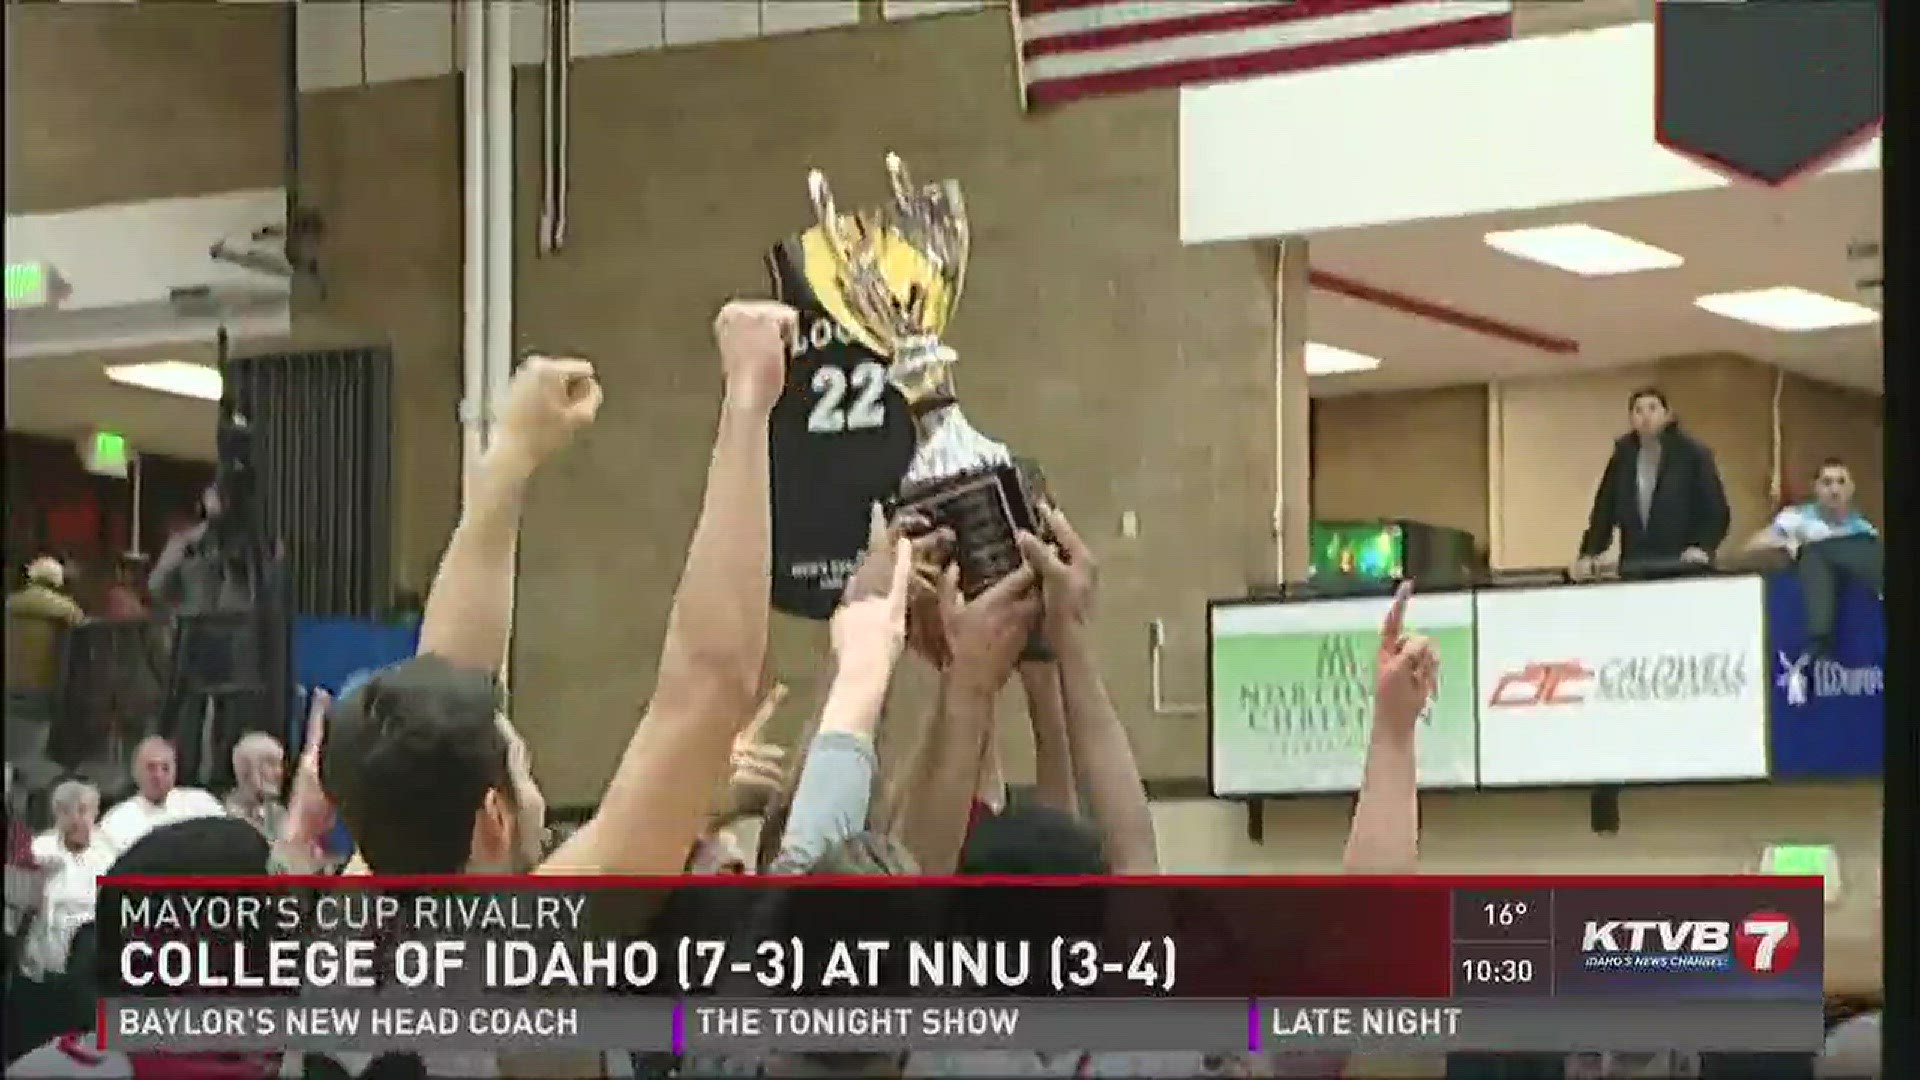 Mayor's Cup rivalry: College of Idaho at NNU.